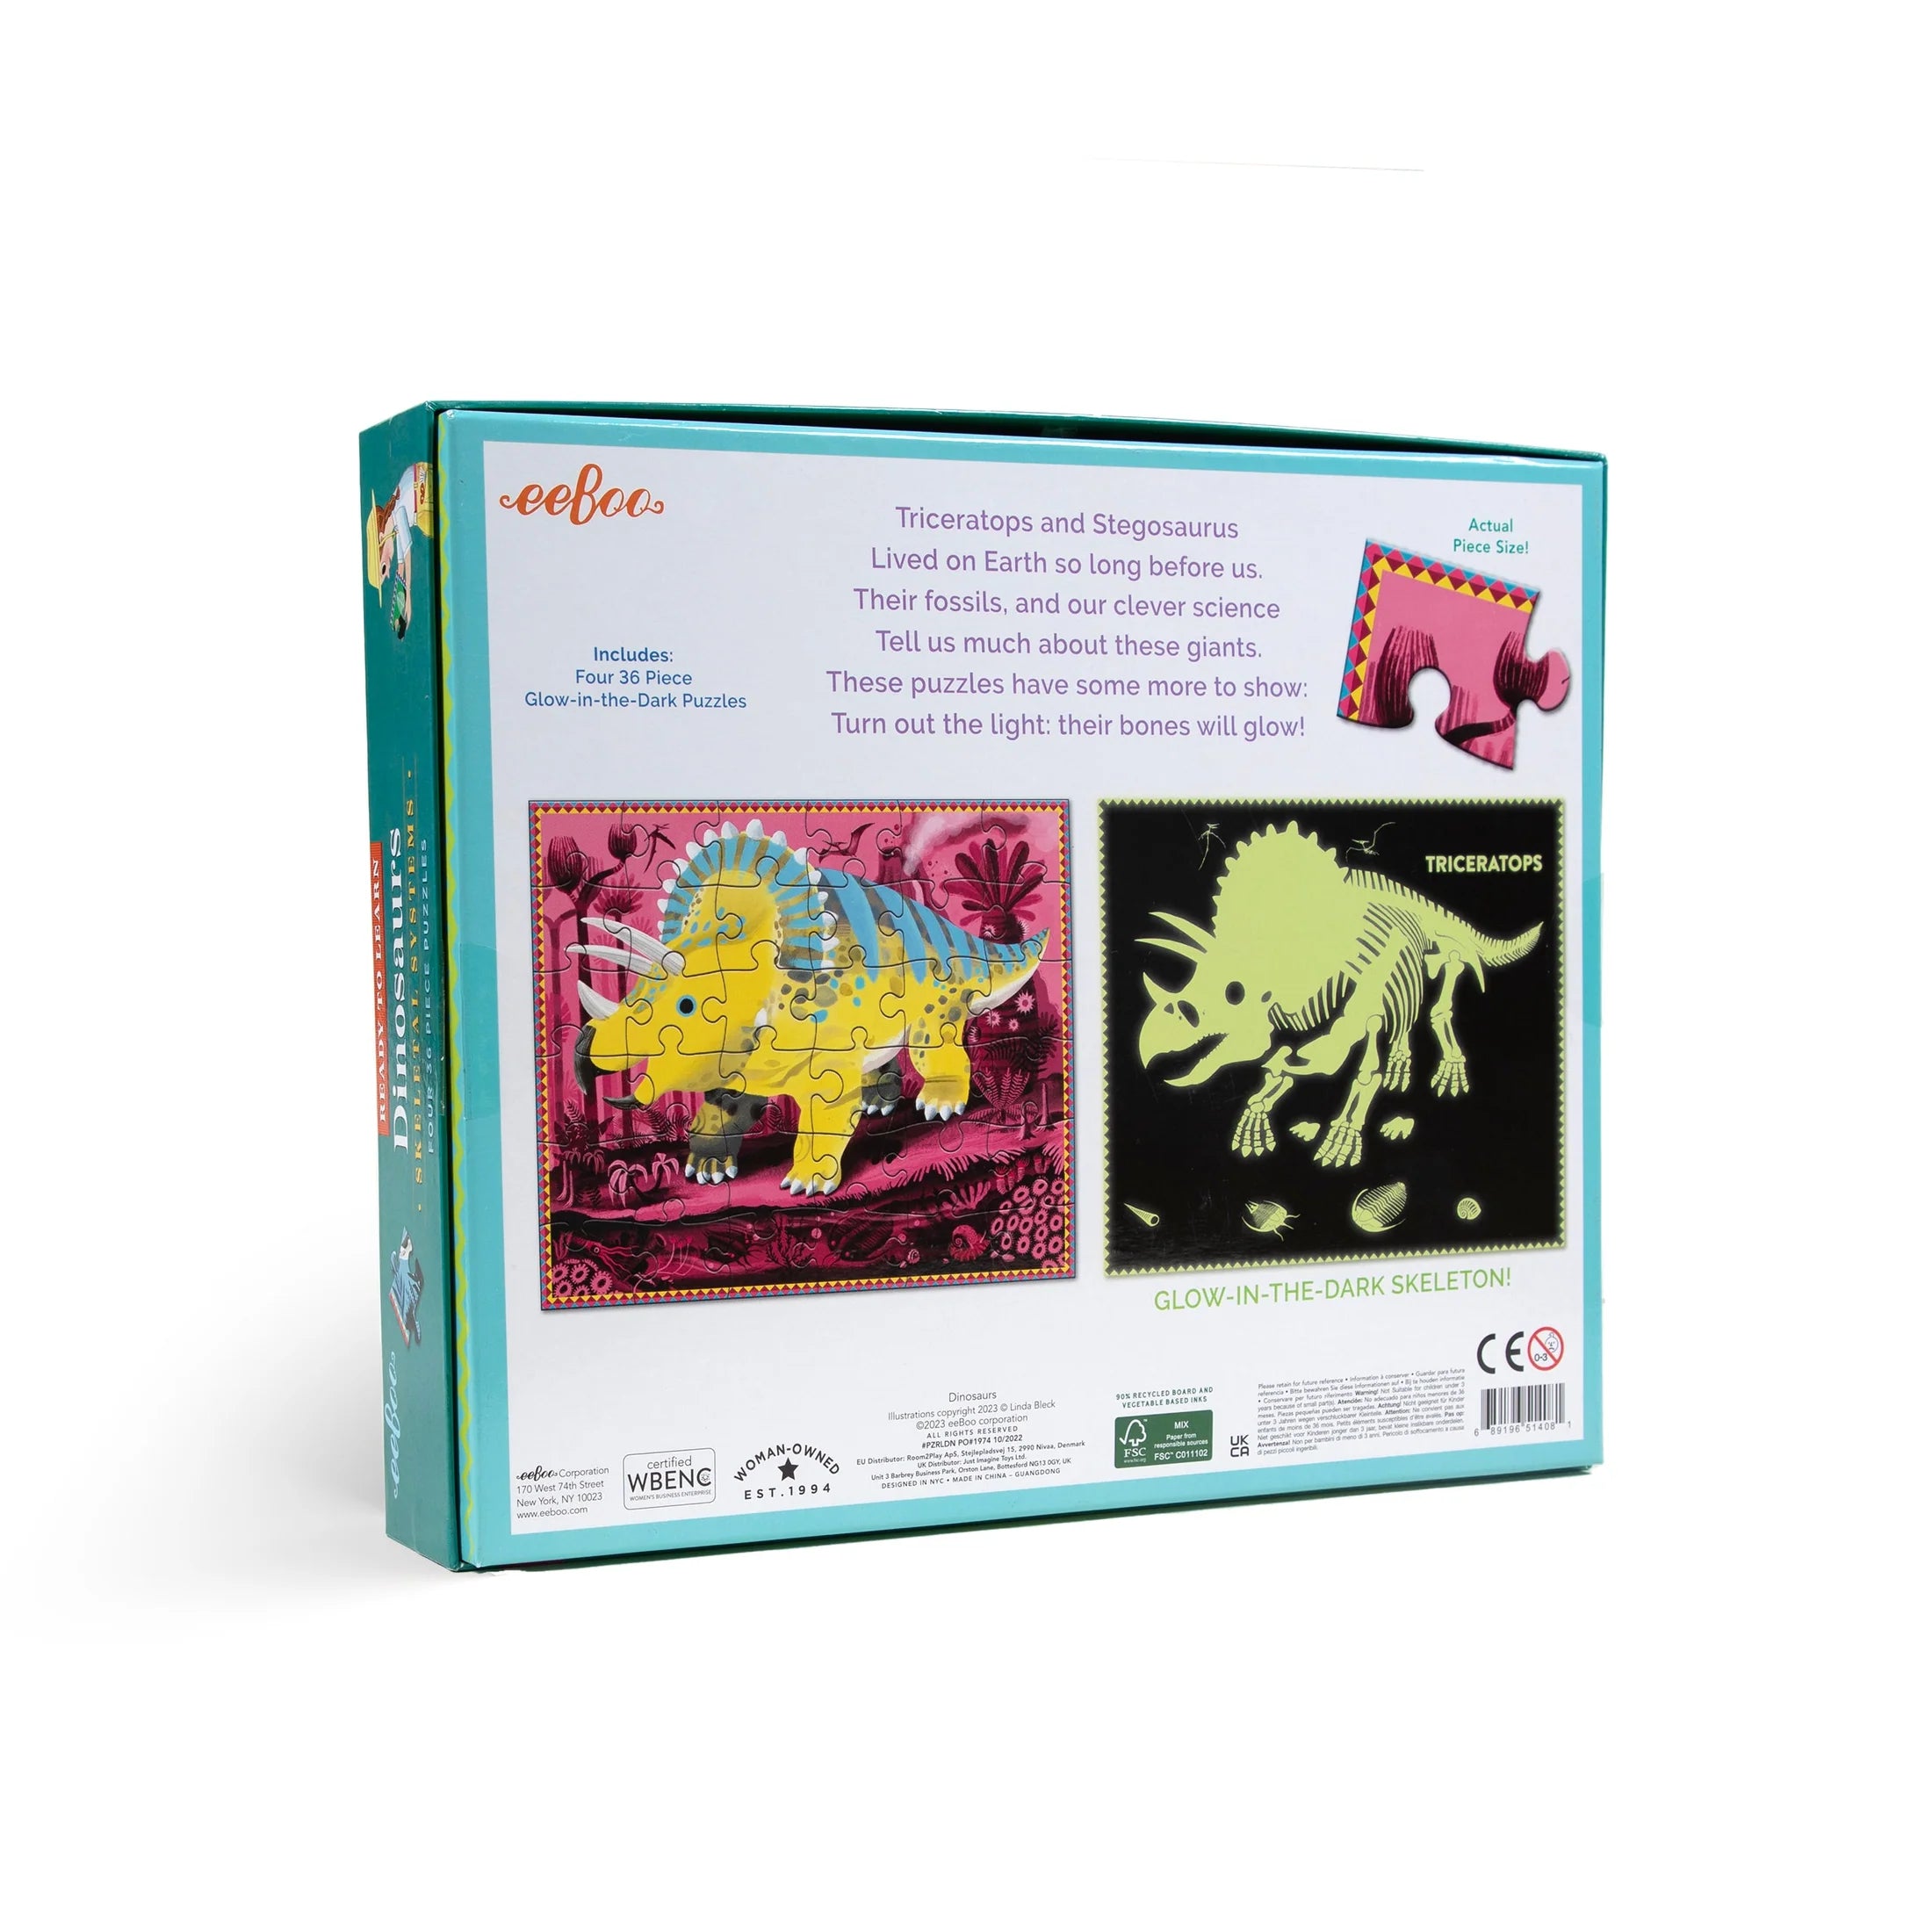 Dinosaurs Skeletal Systems Four 36 Piece Puzzles